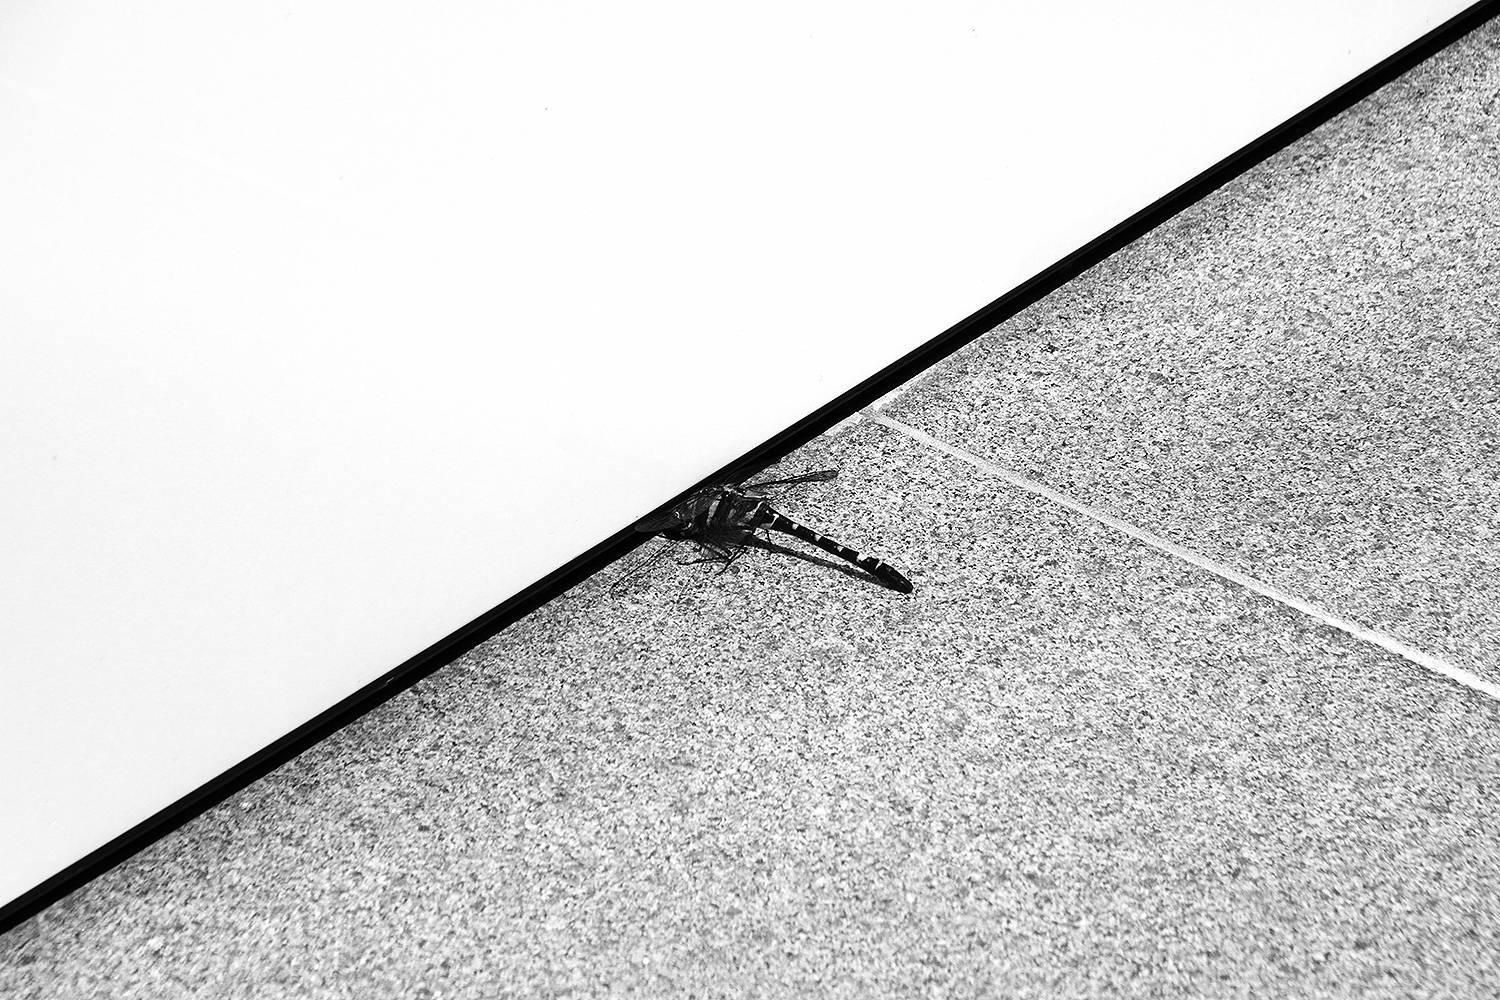 Brian Pearson Black and White Photograph - Dragonfly at Omotesando Chanel Boutique, Tokyo, 2015